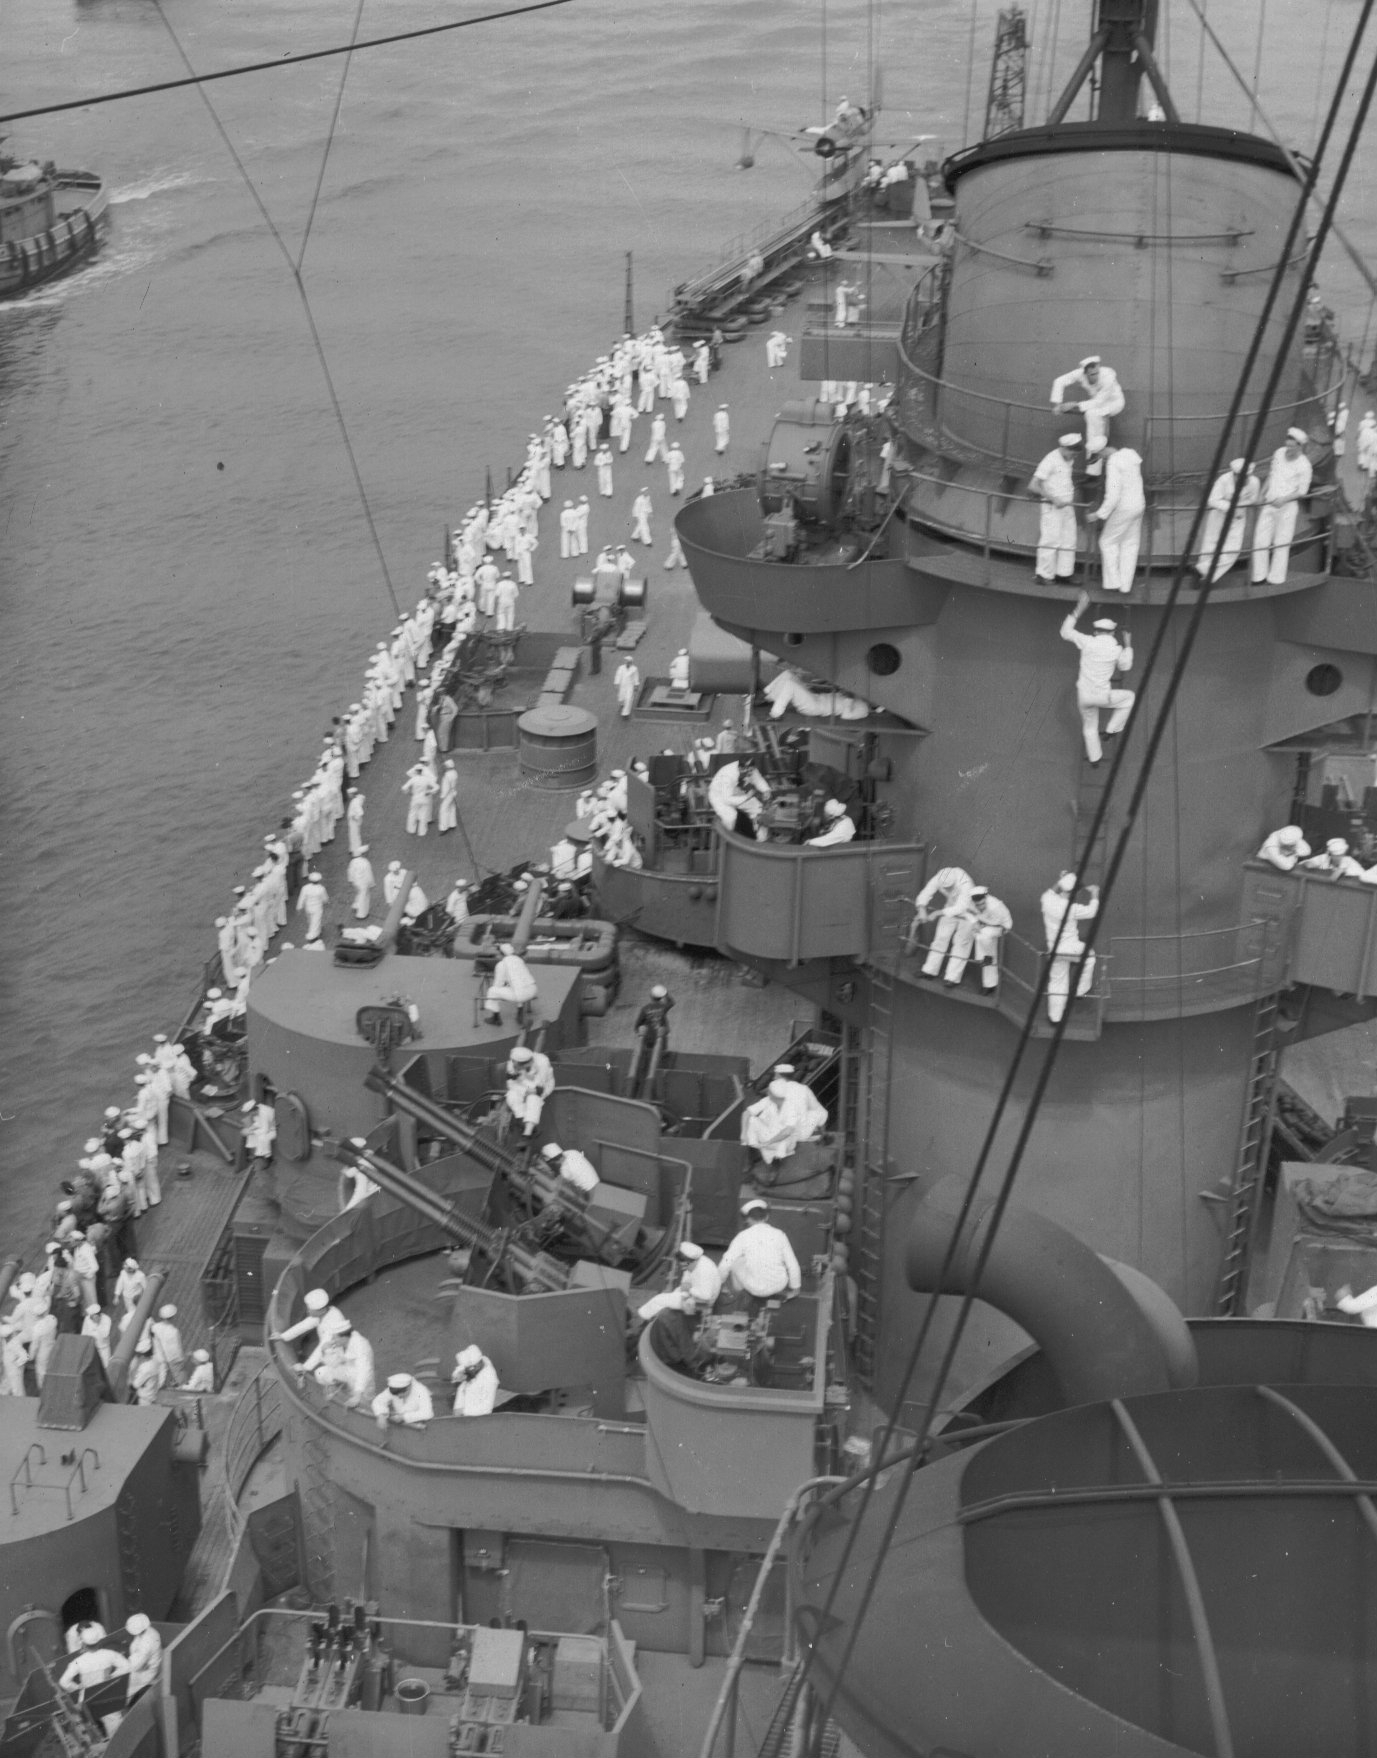 Sailors of USS New Jersey preparing for the commissioning ceremony, Philadelphia Navy Yard, Pennsylvania, United States, 23 May 1943